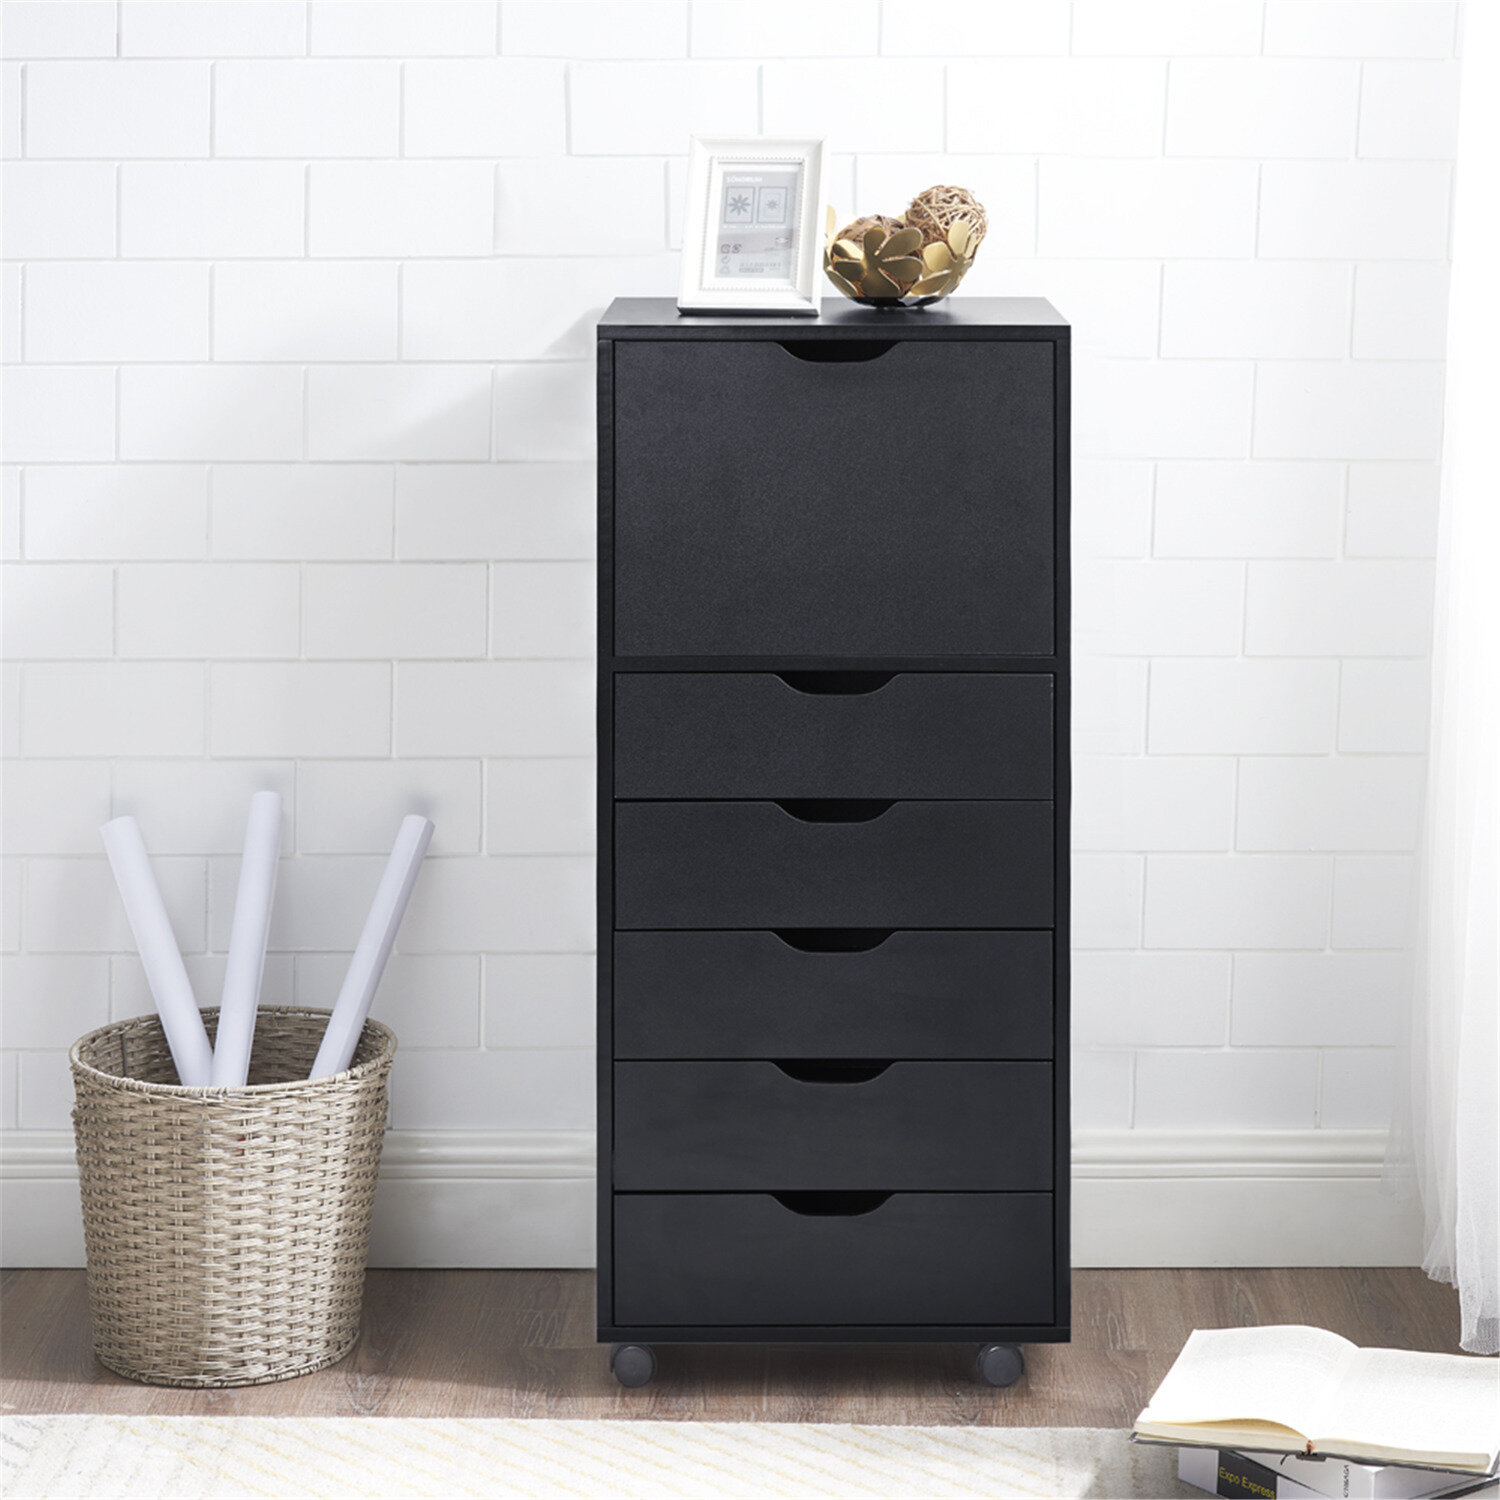 7-Drawer Wood Filing Cabinet with Wheels Black Drawers Cabinet Mobile Lateral Filing Organizer 